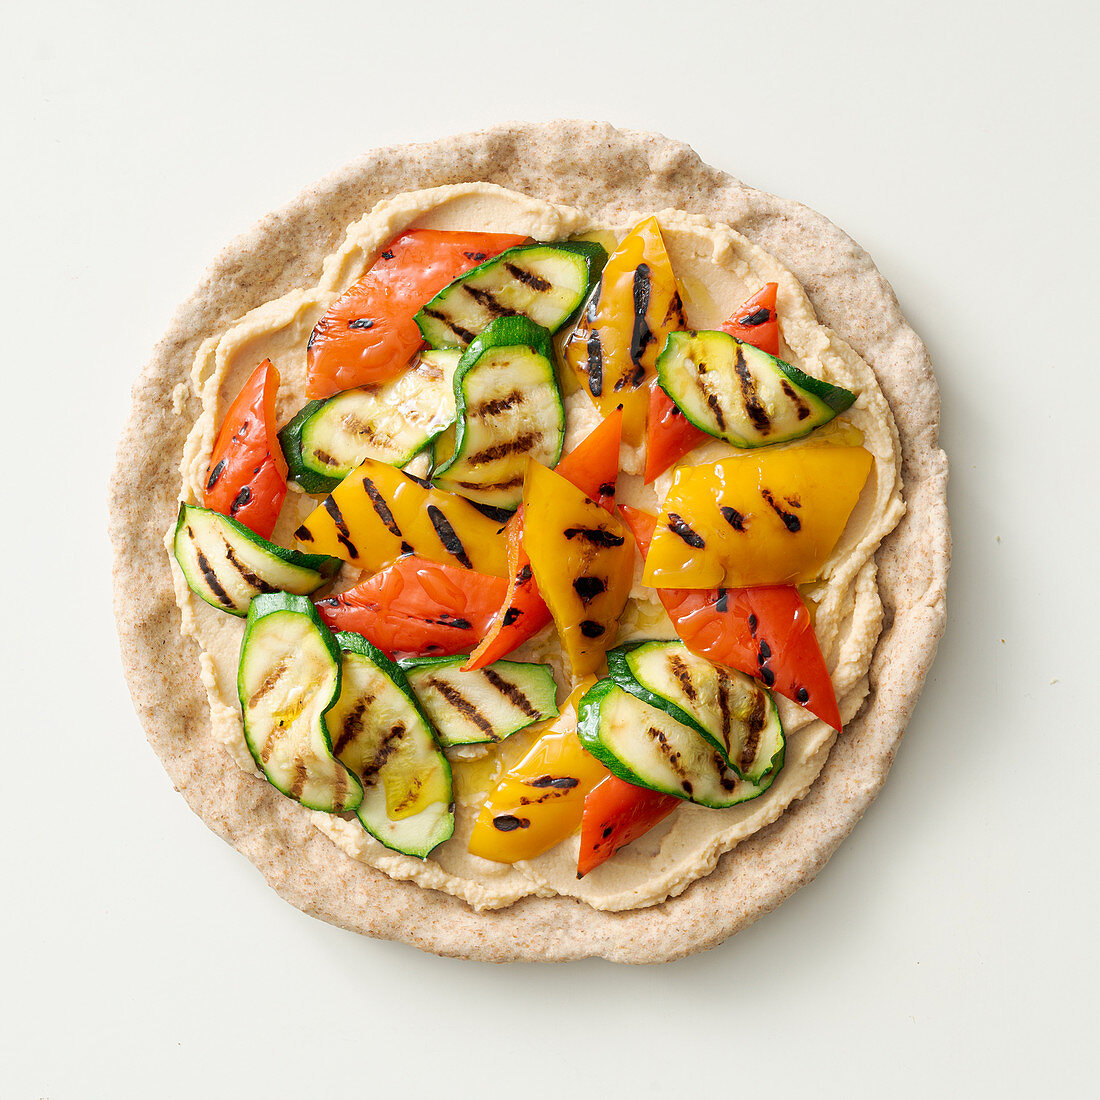 Pan pizza with hummus and grilled vegetables